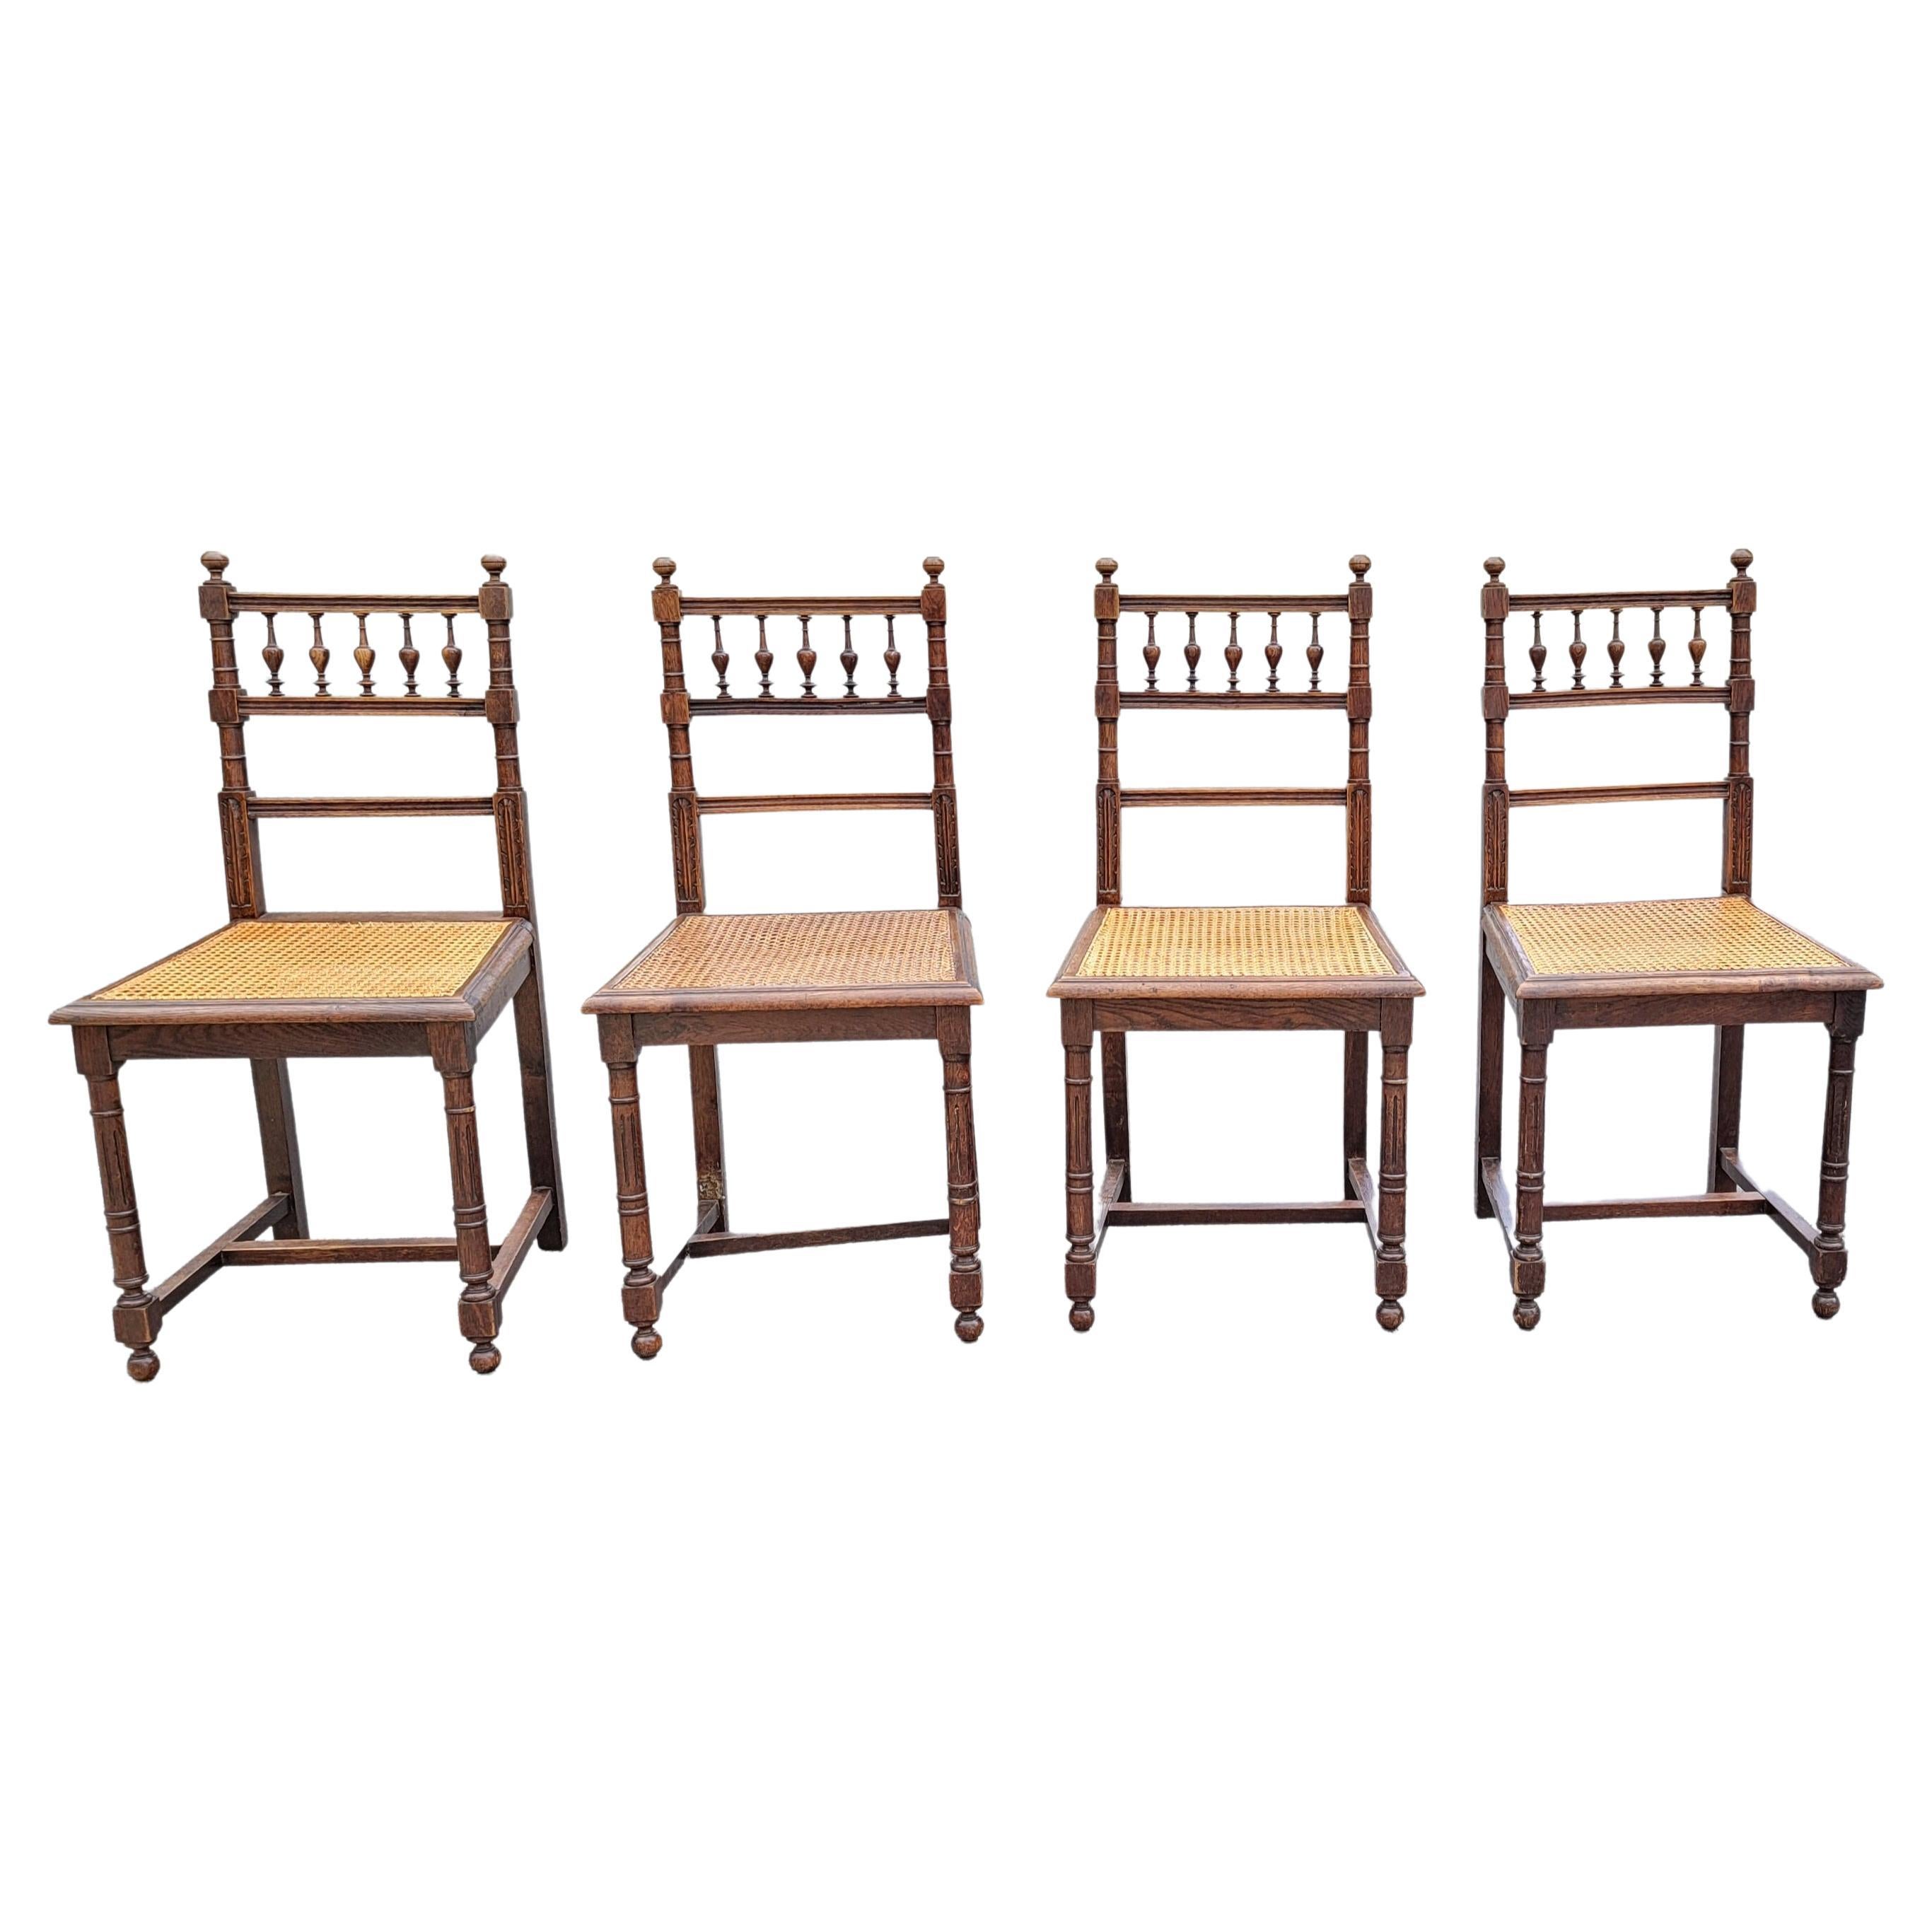 20th Century Set of 5 Early 20th C. French Henry II Oak and Canned Seat Dining Chairs For Sale